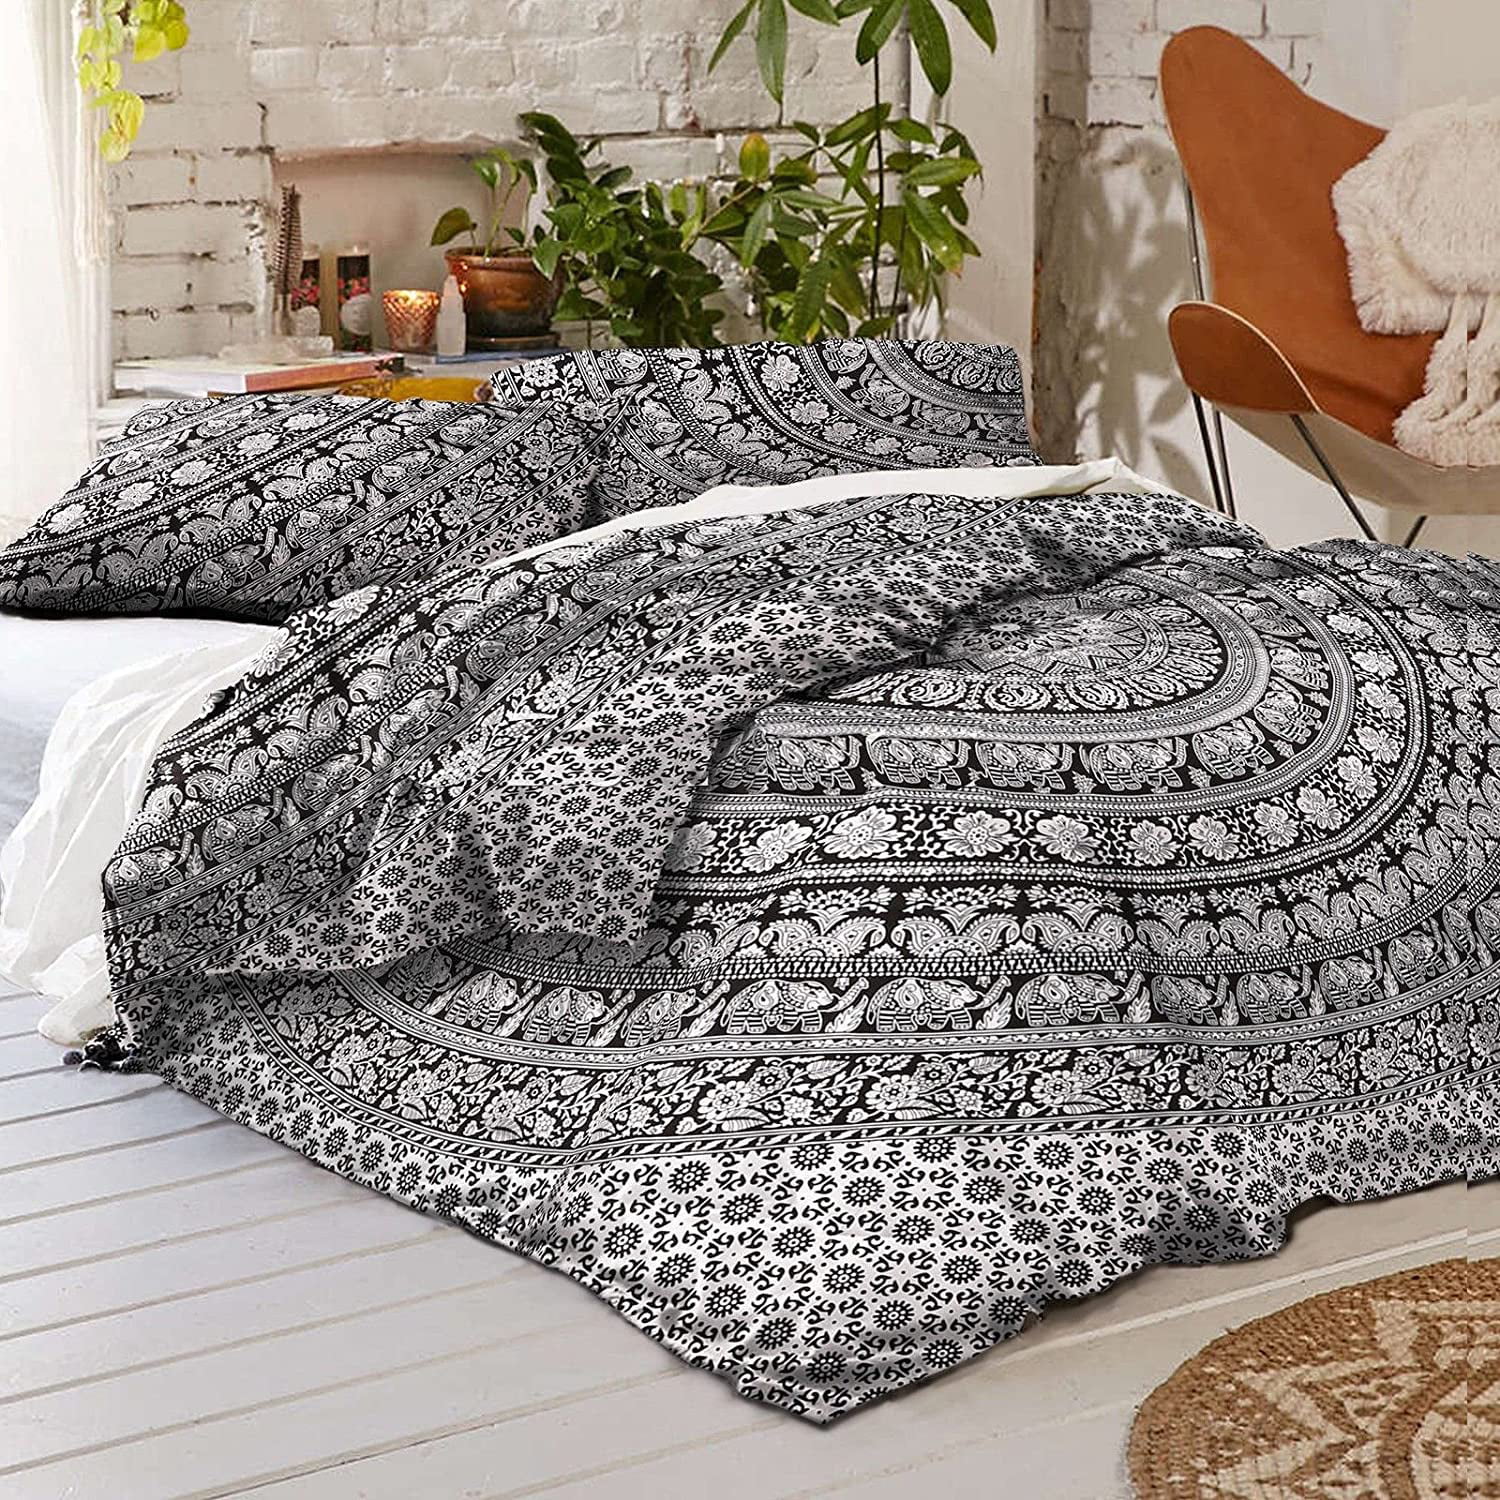 Details about   Indian Handmade Cotton Floral Mandala Queen Vintage Reversible Blanket Throw 